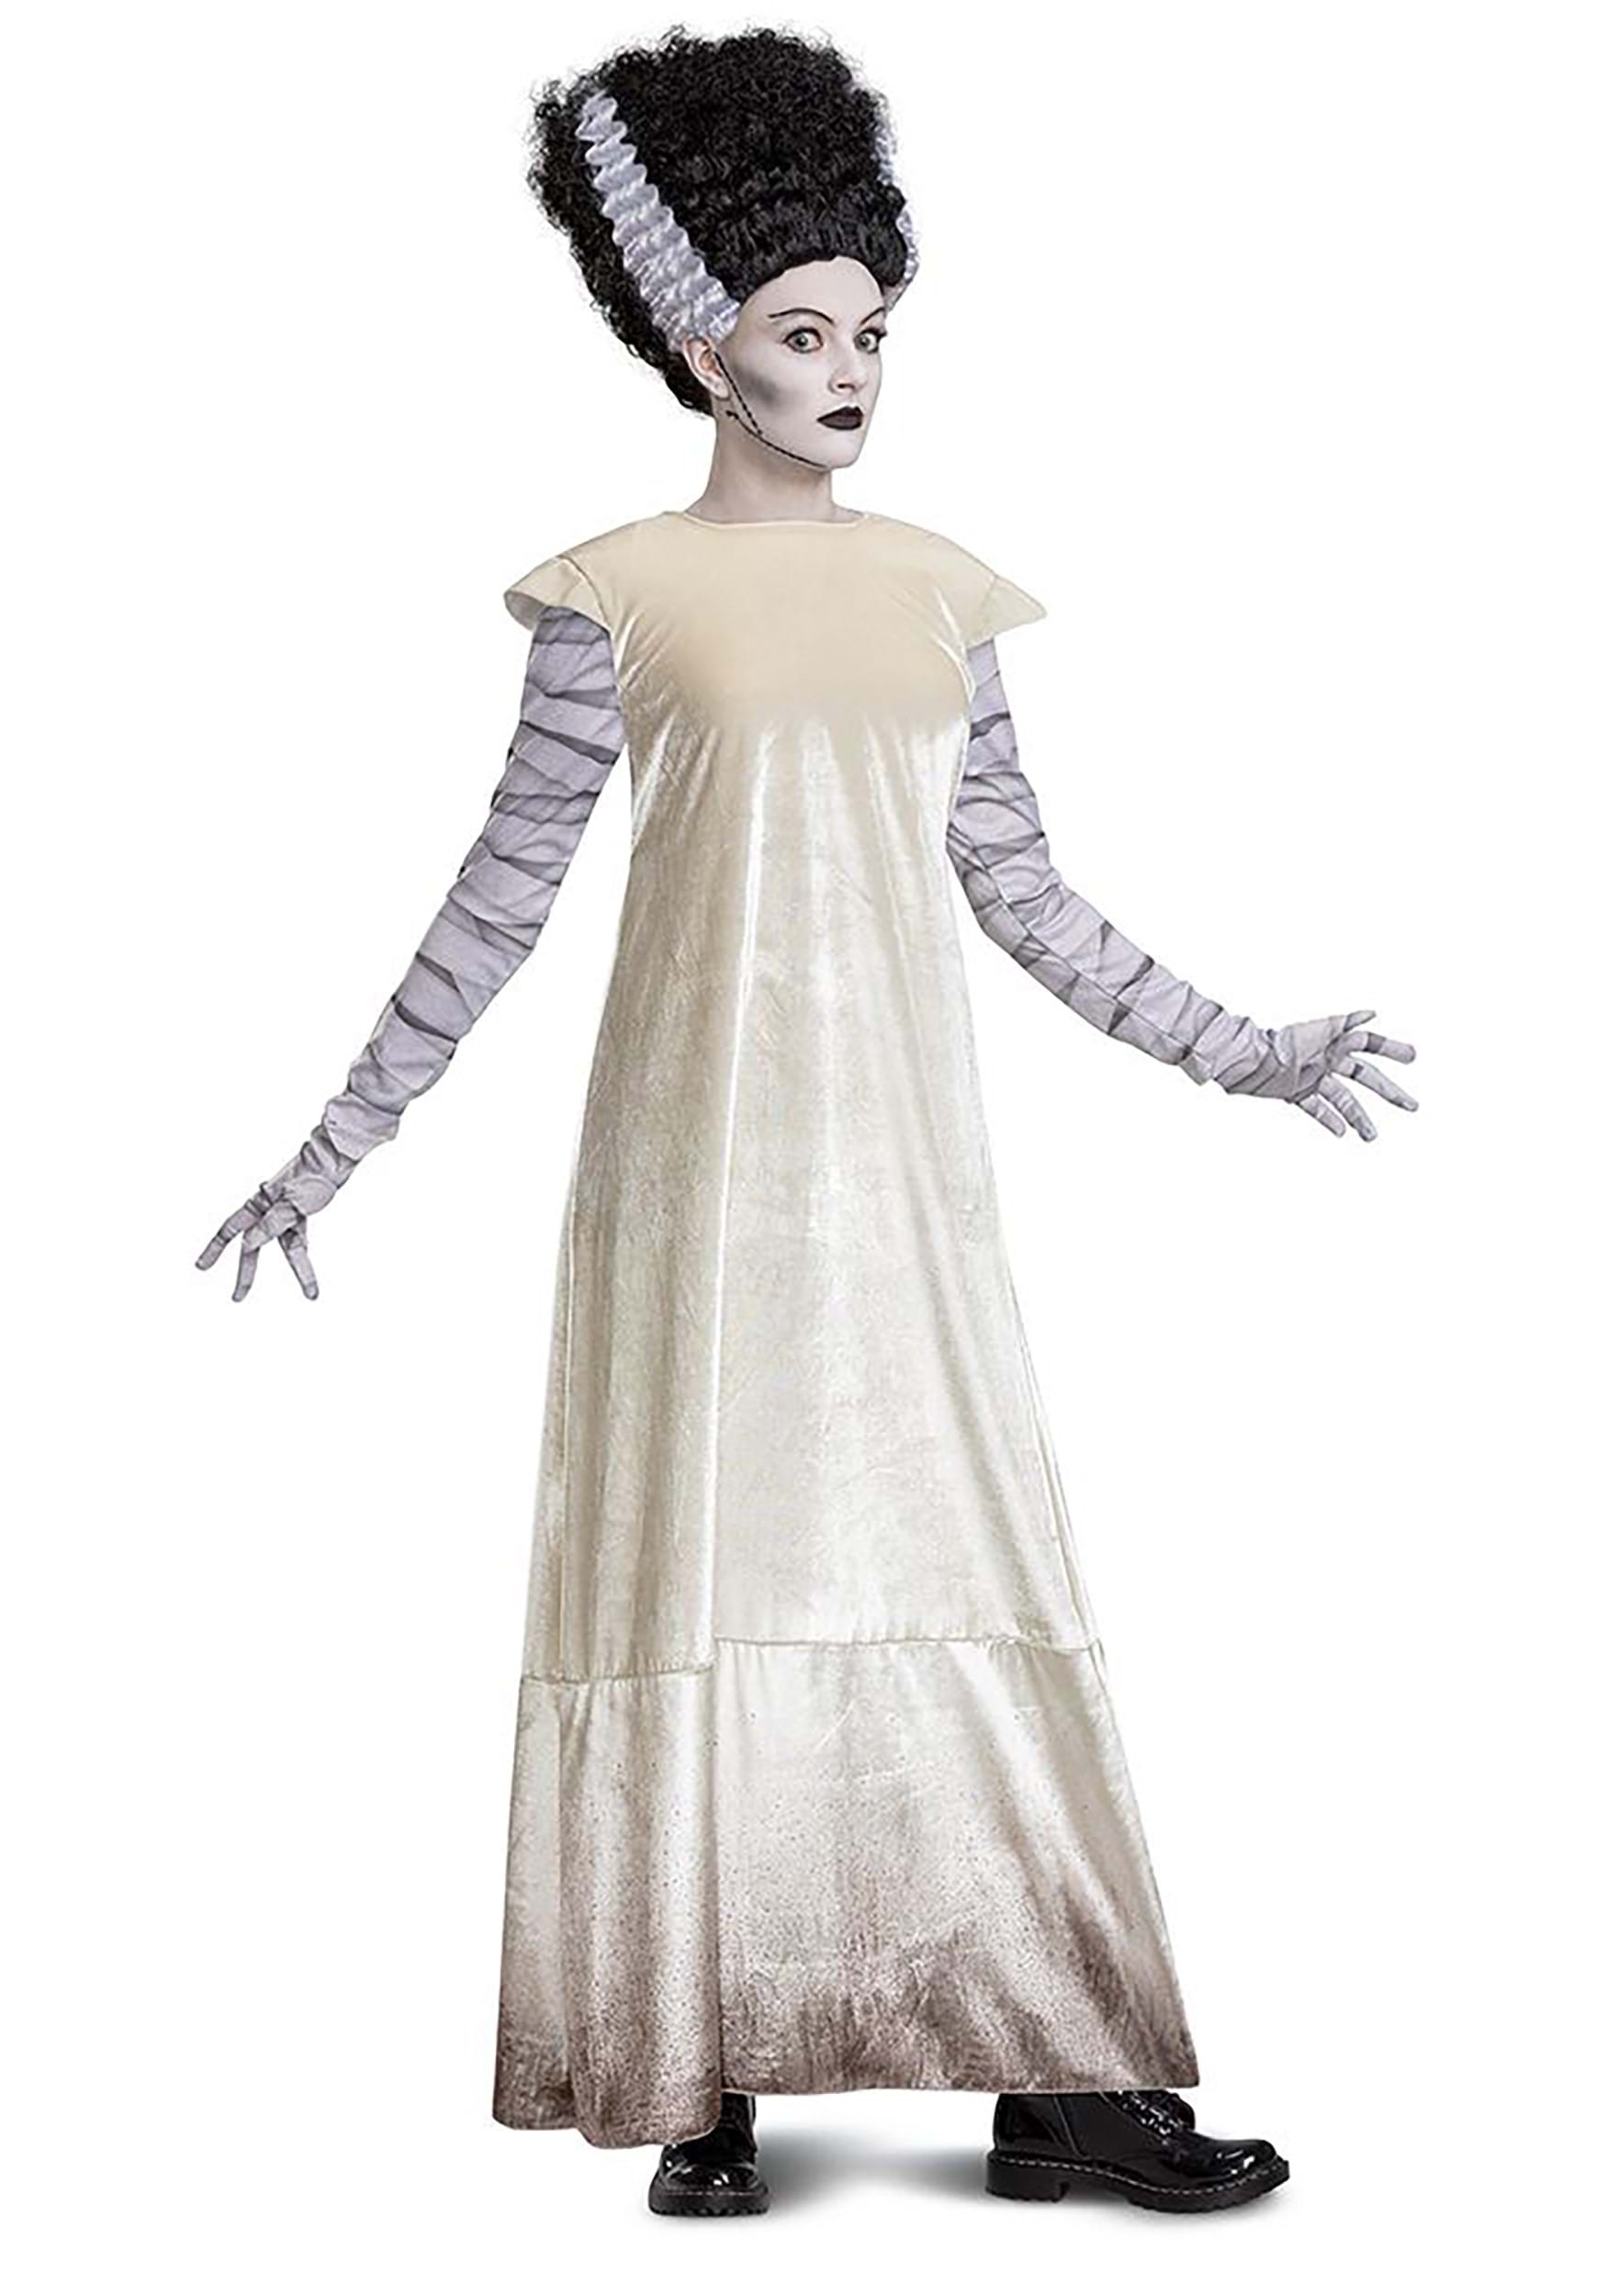 Monsters Deluxe Bride of Frankenstein Costume for Adults